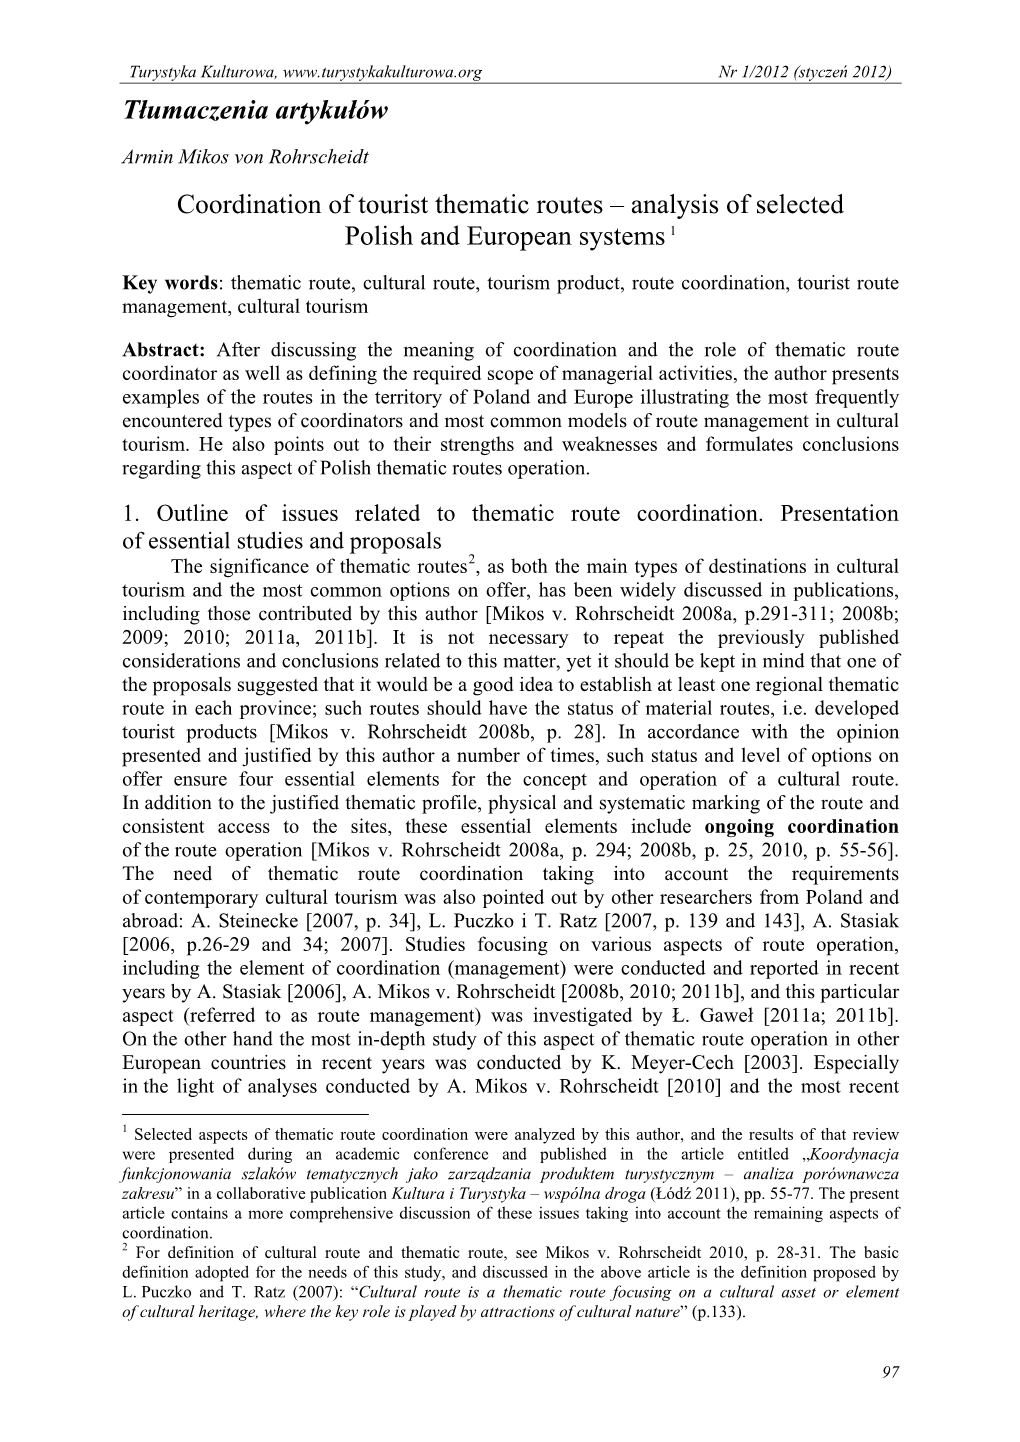 Coordination of Tourist Thematic Routes – Analysis of Selected Polish and European Systems 1